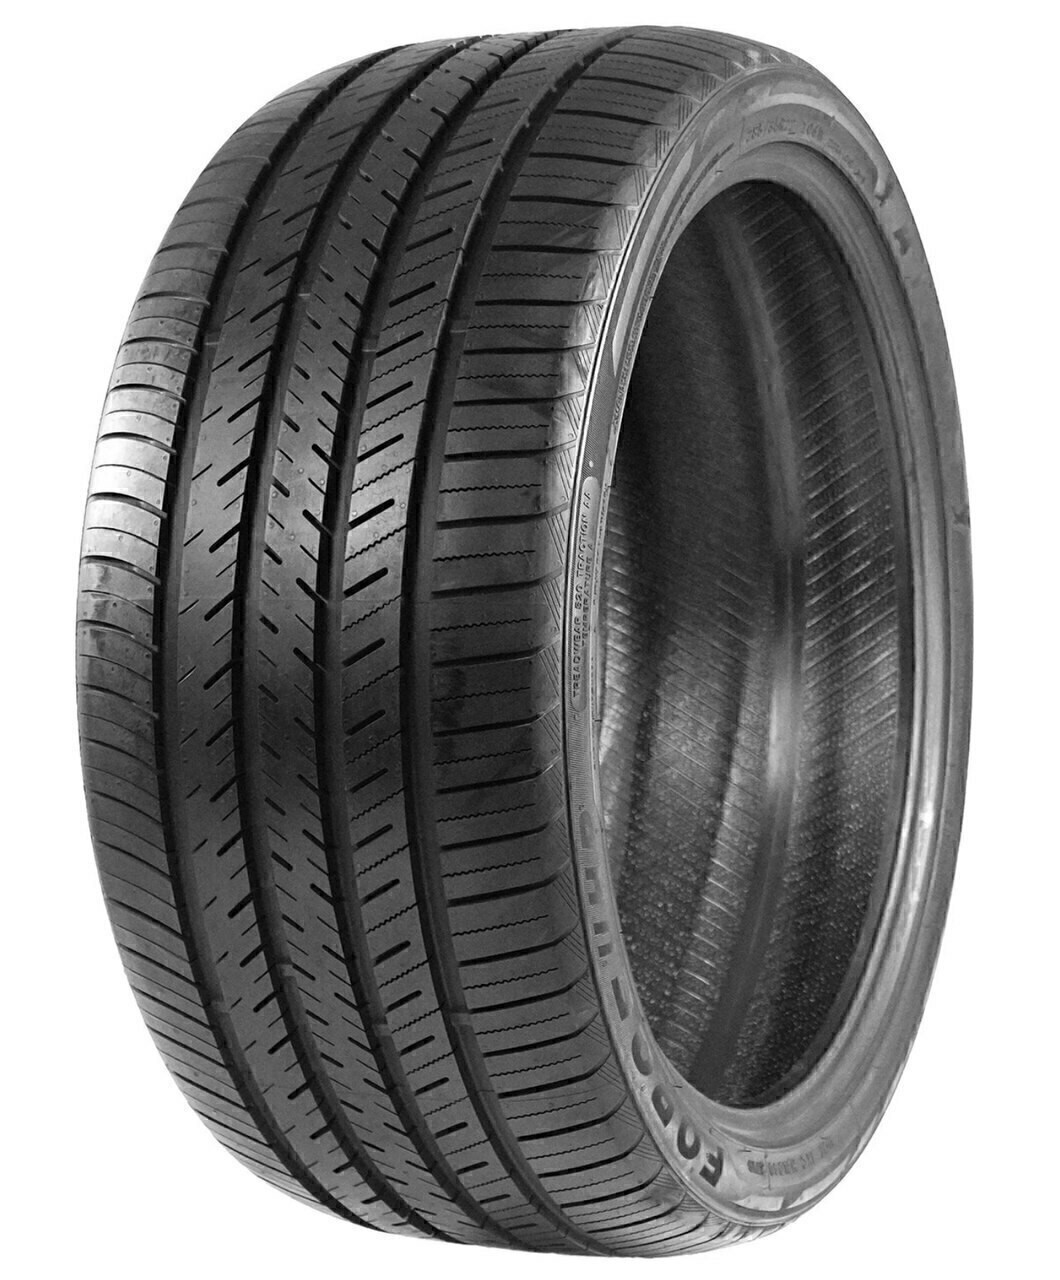 245/45R18 ATLAS FORCE UHP 100Y XL 520AA***40K***